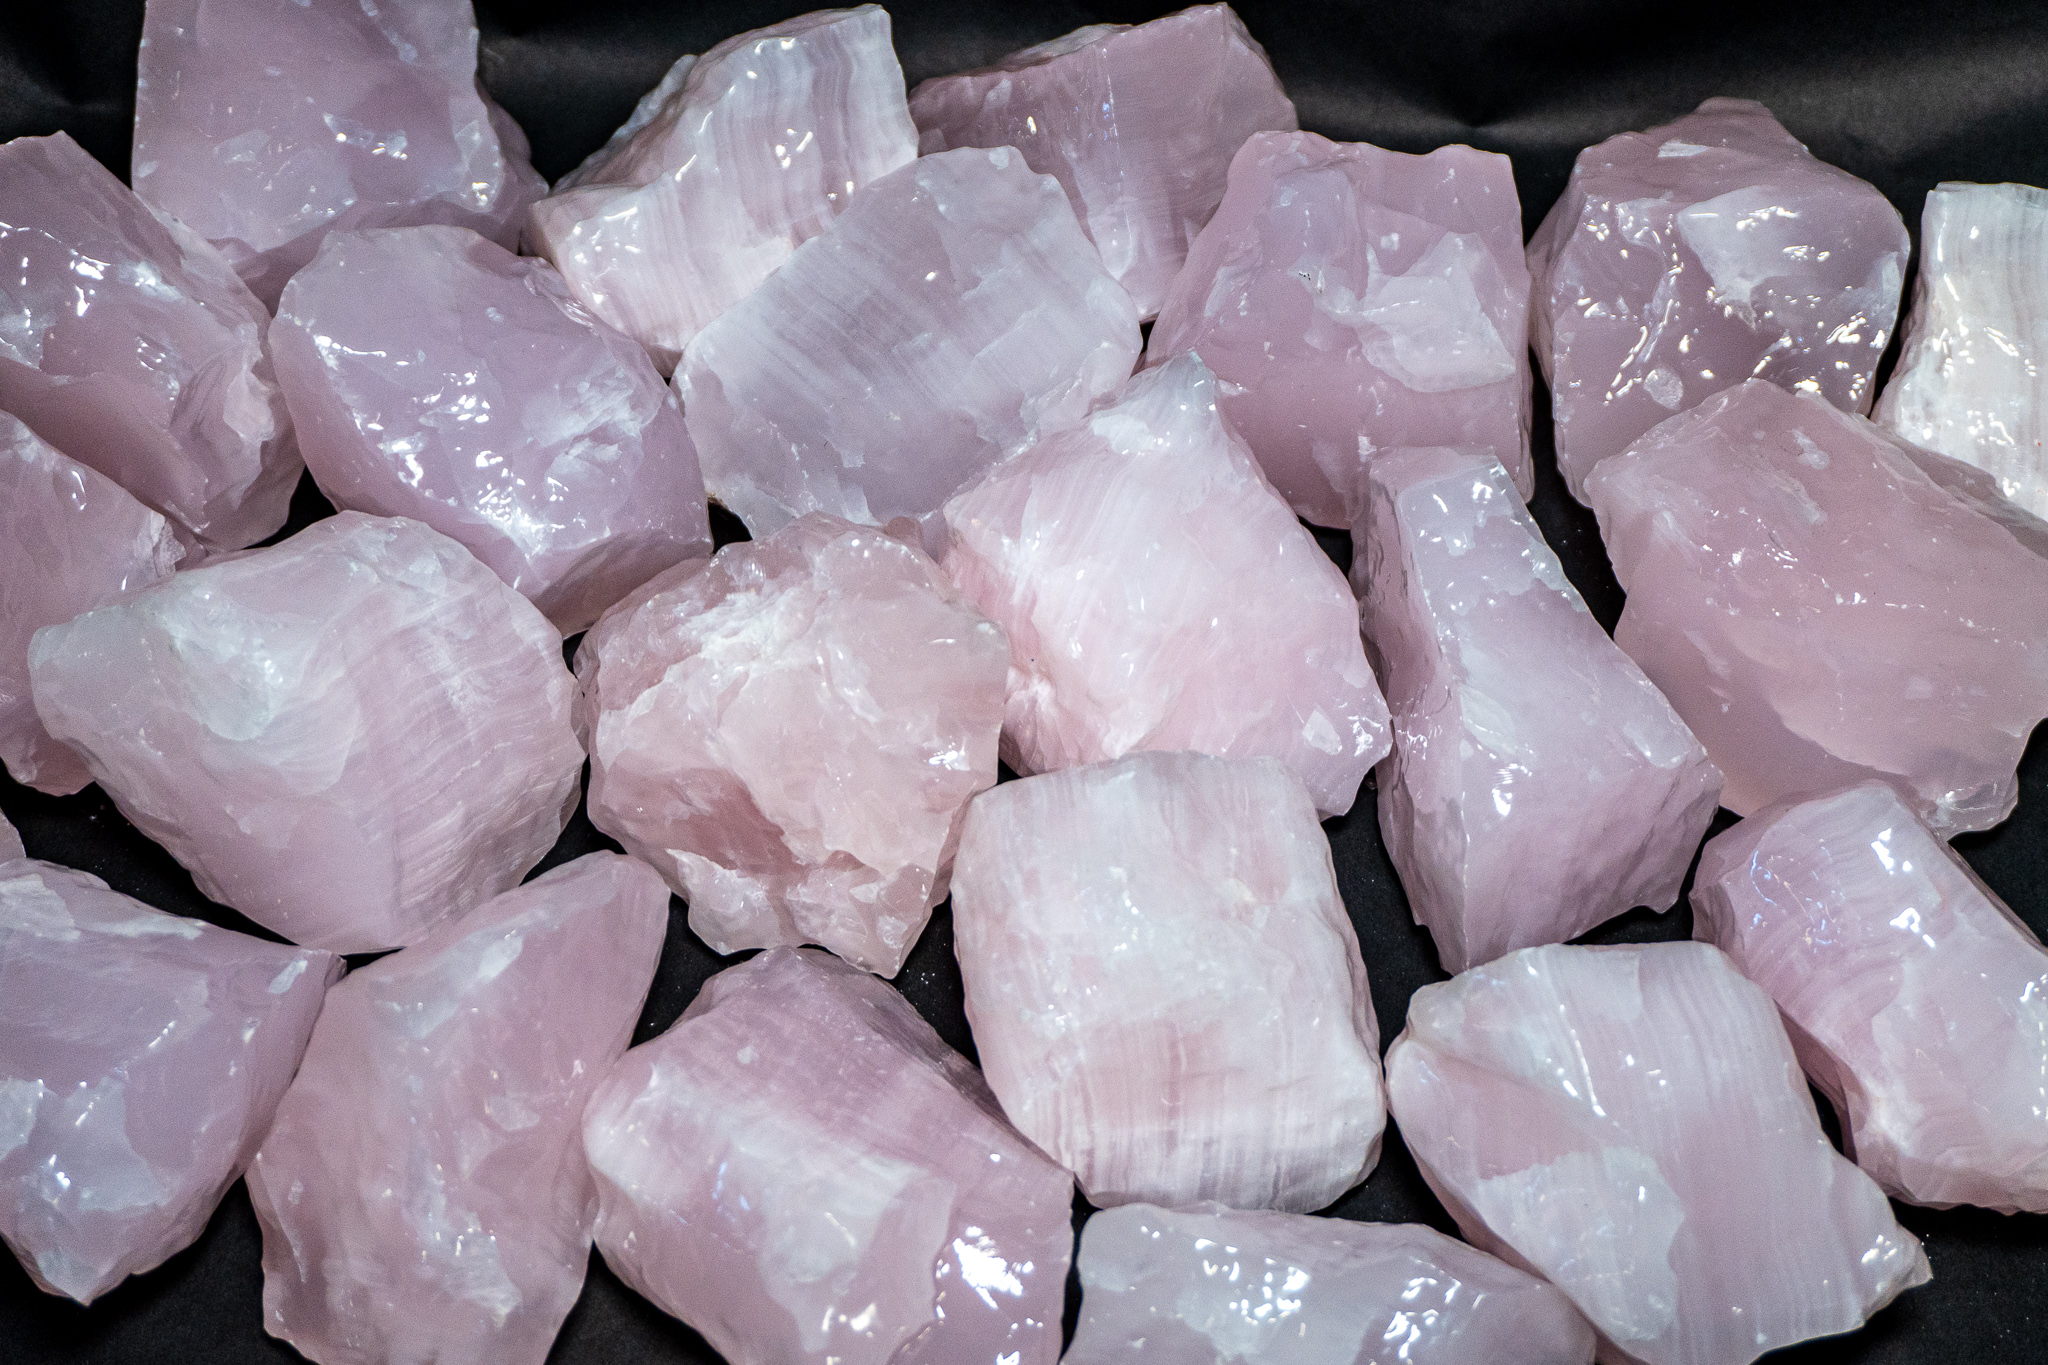 Choose How Many Grade A+ Pink Calcite 2" Rough Natural Pink Calcite Stones 